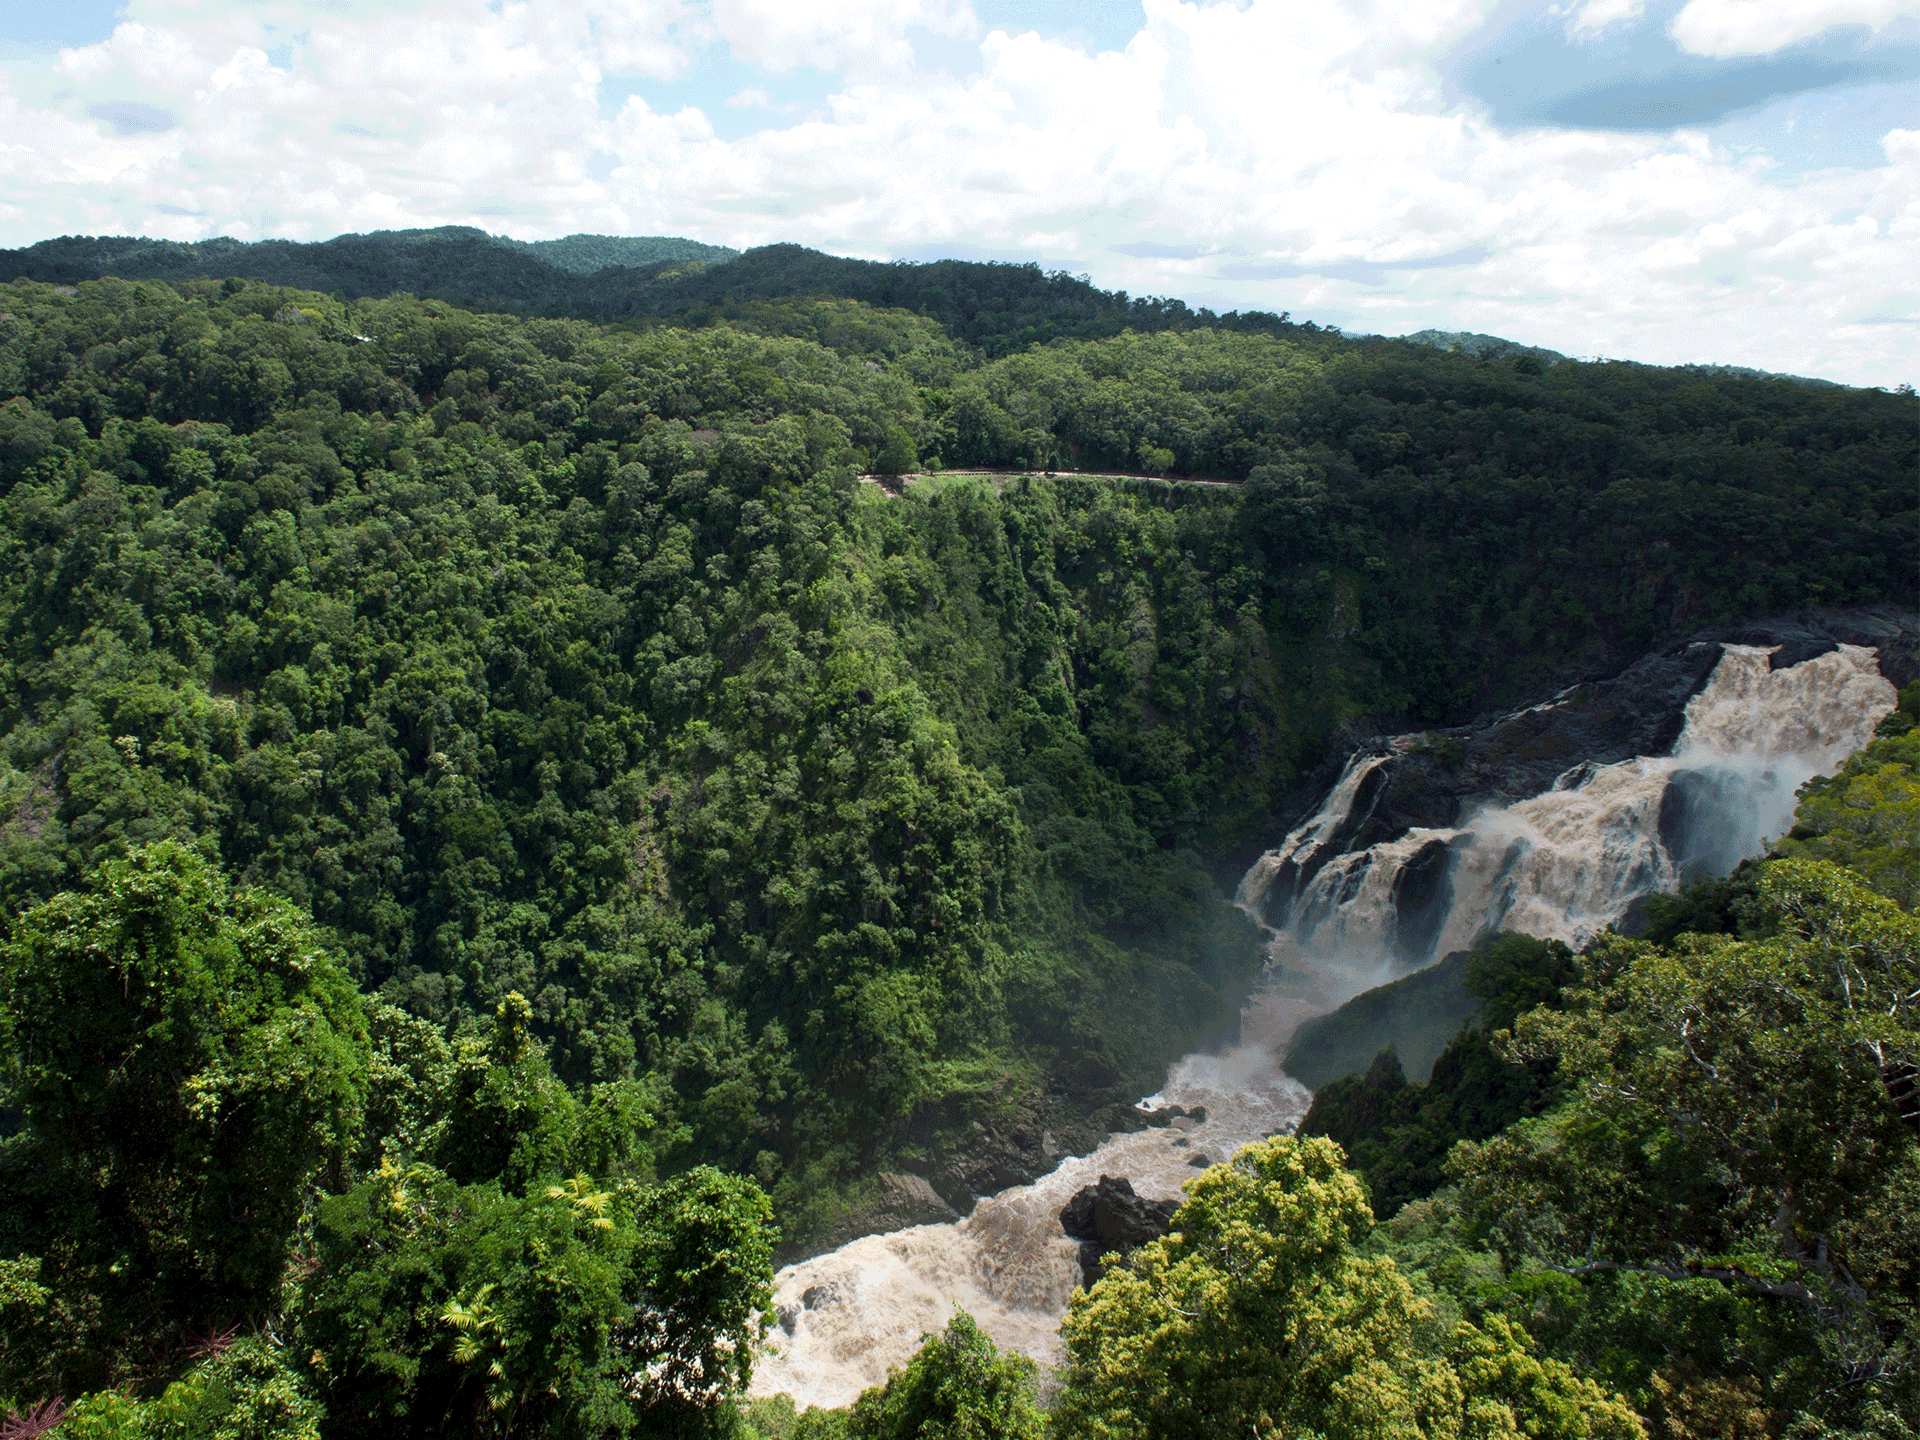 Indigenous experiences in Australia | The falls at Mossman Gorge